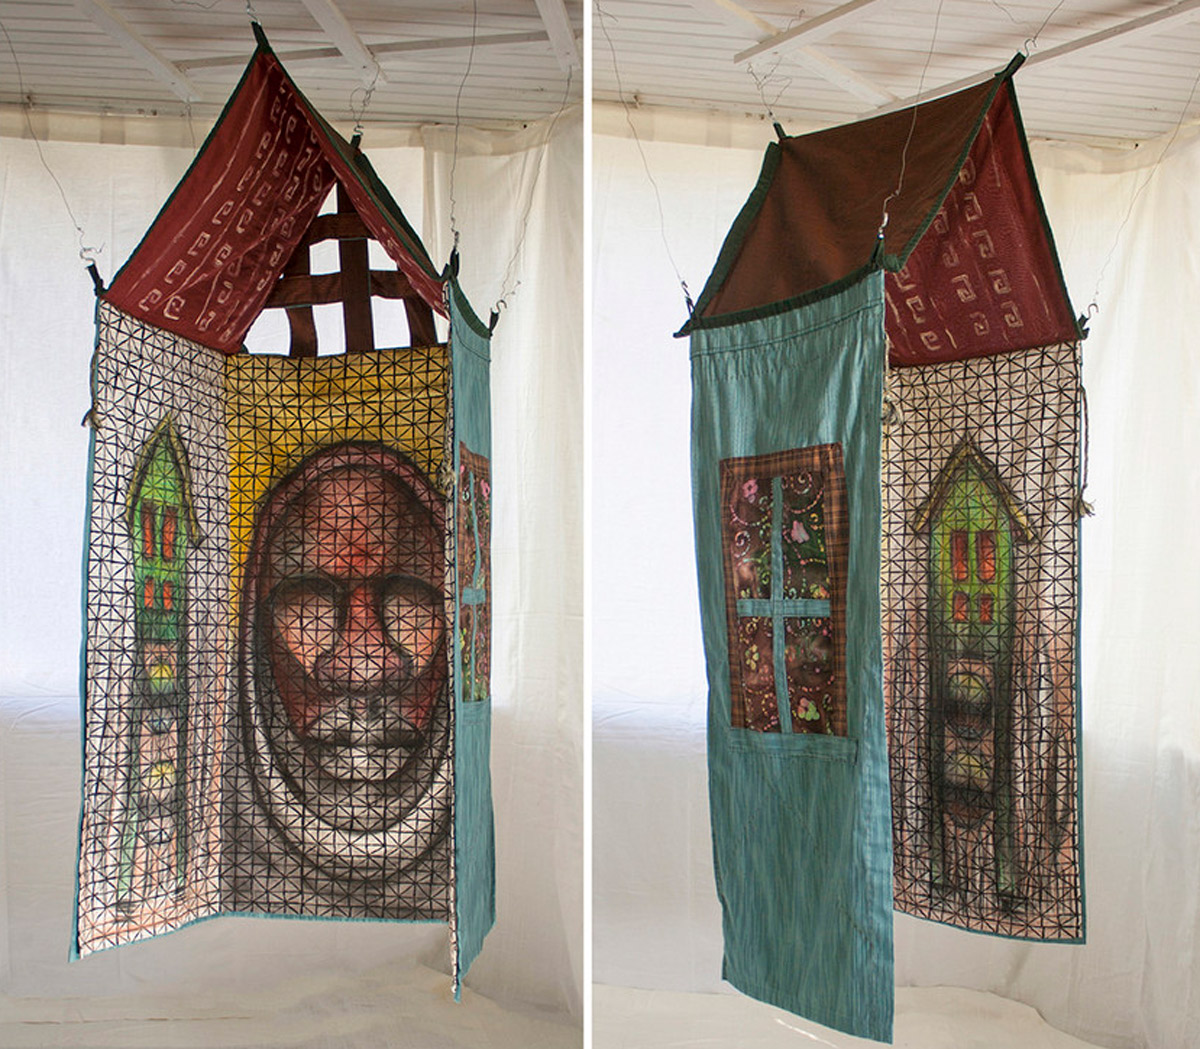 Two views of a quilt hanging in the shape of a house - with a man's face painted on the inside and red peaked roof.